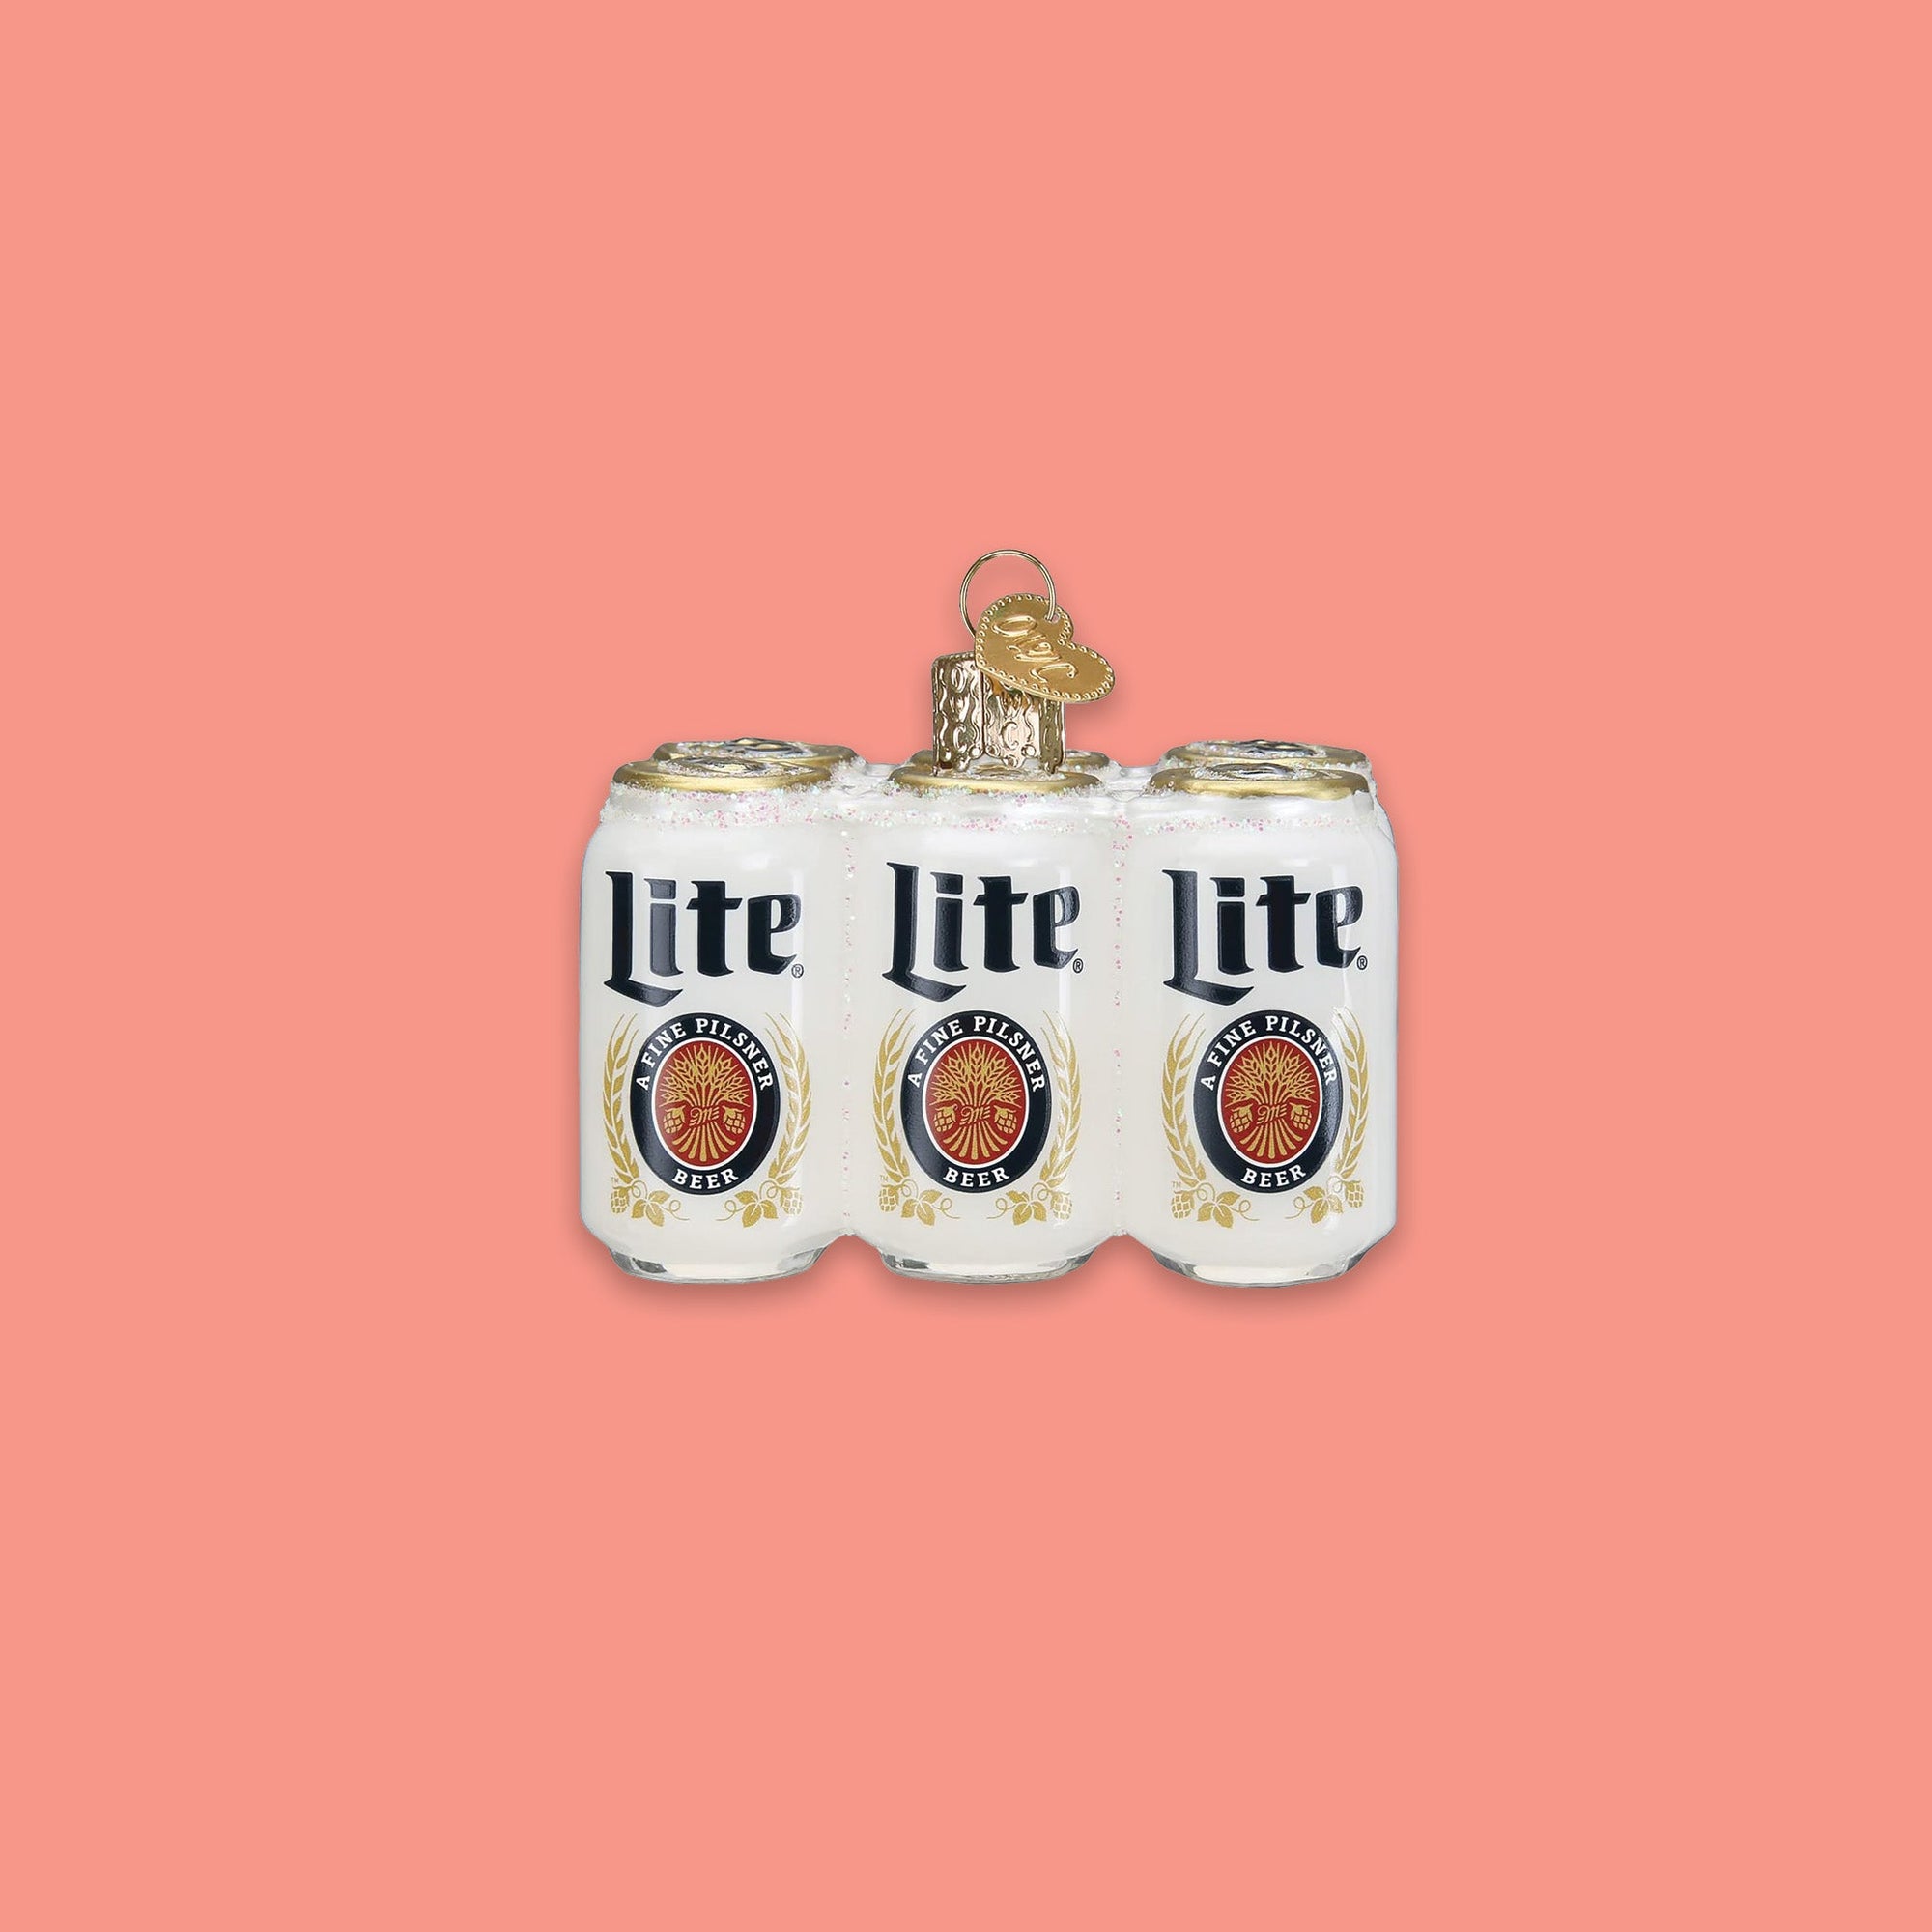 On a coral pink background sits a six pack of cans ornament. This is a glass Miller 'Lite' six pack ornament.